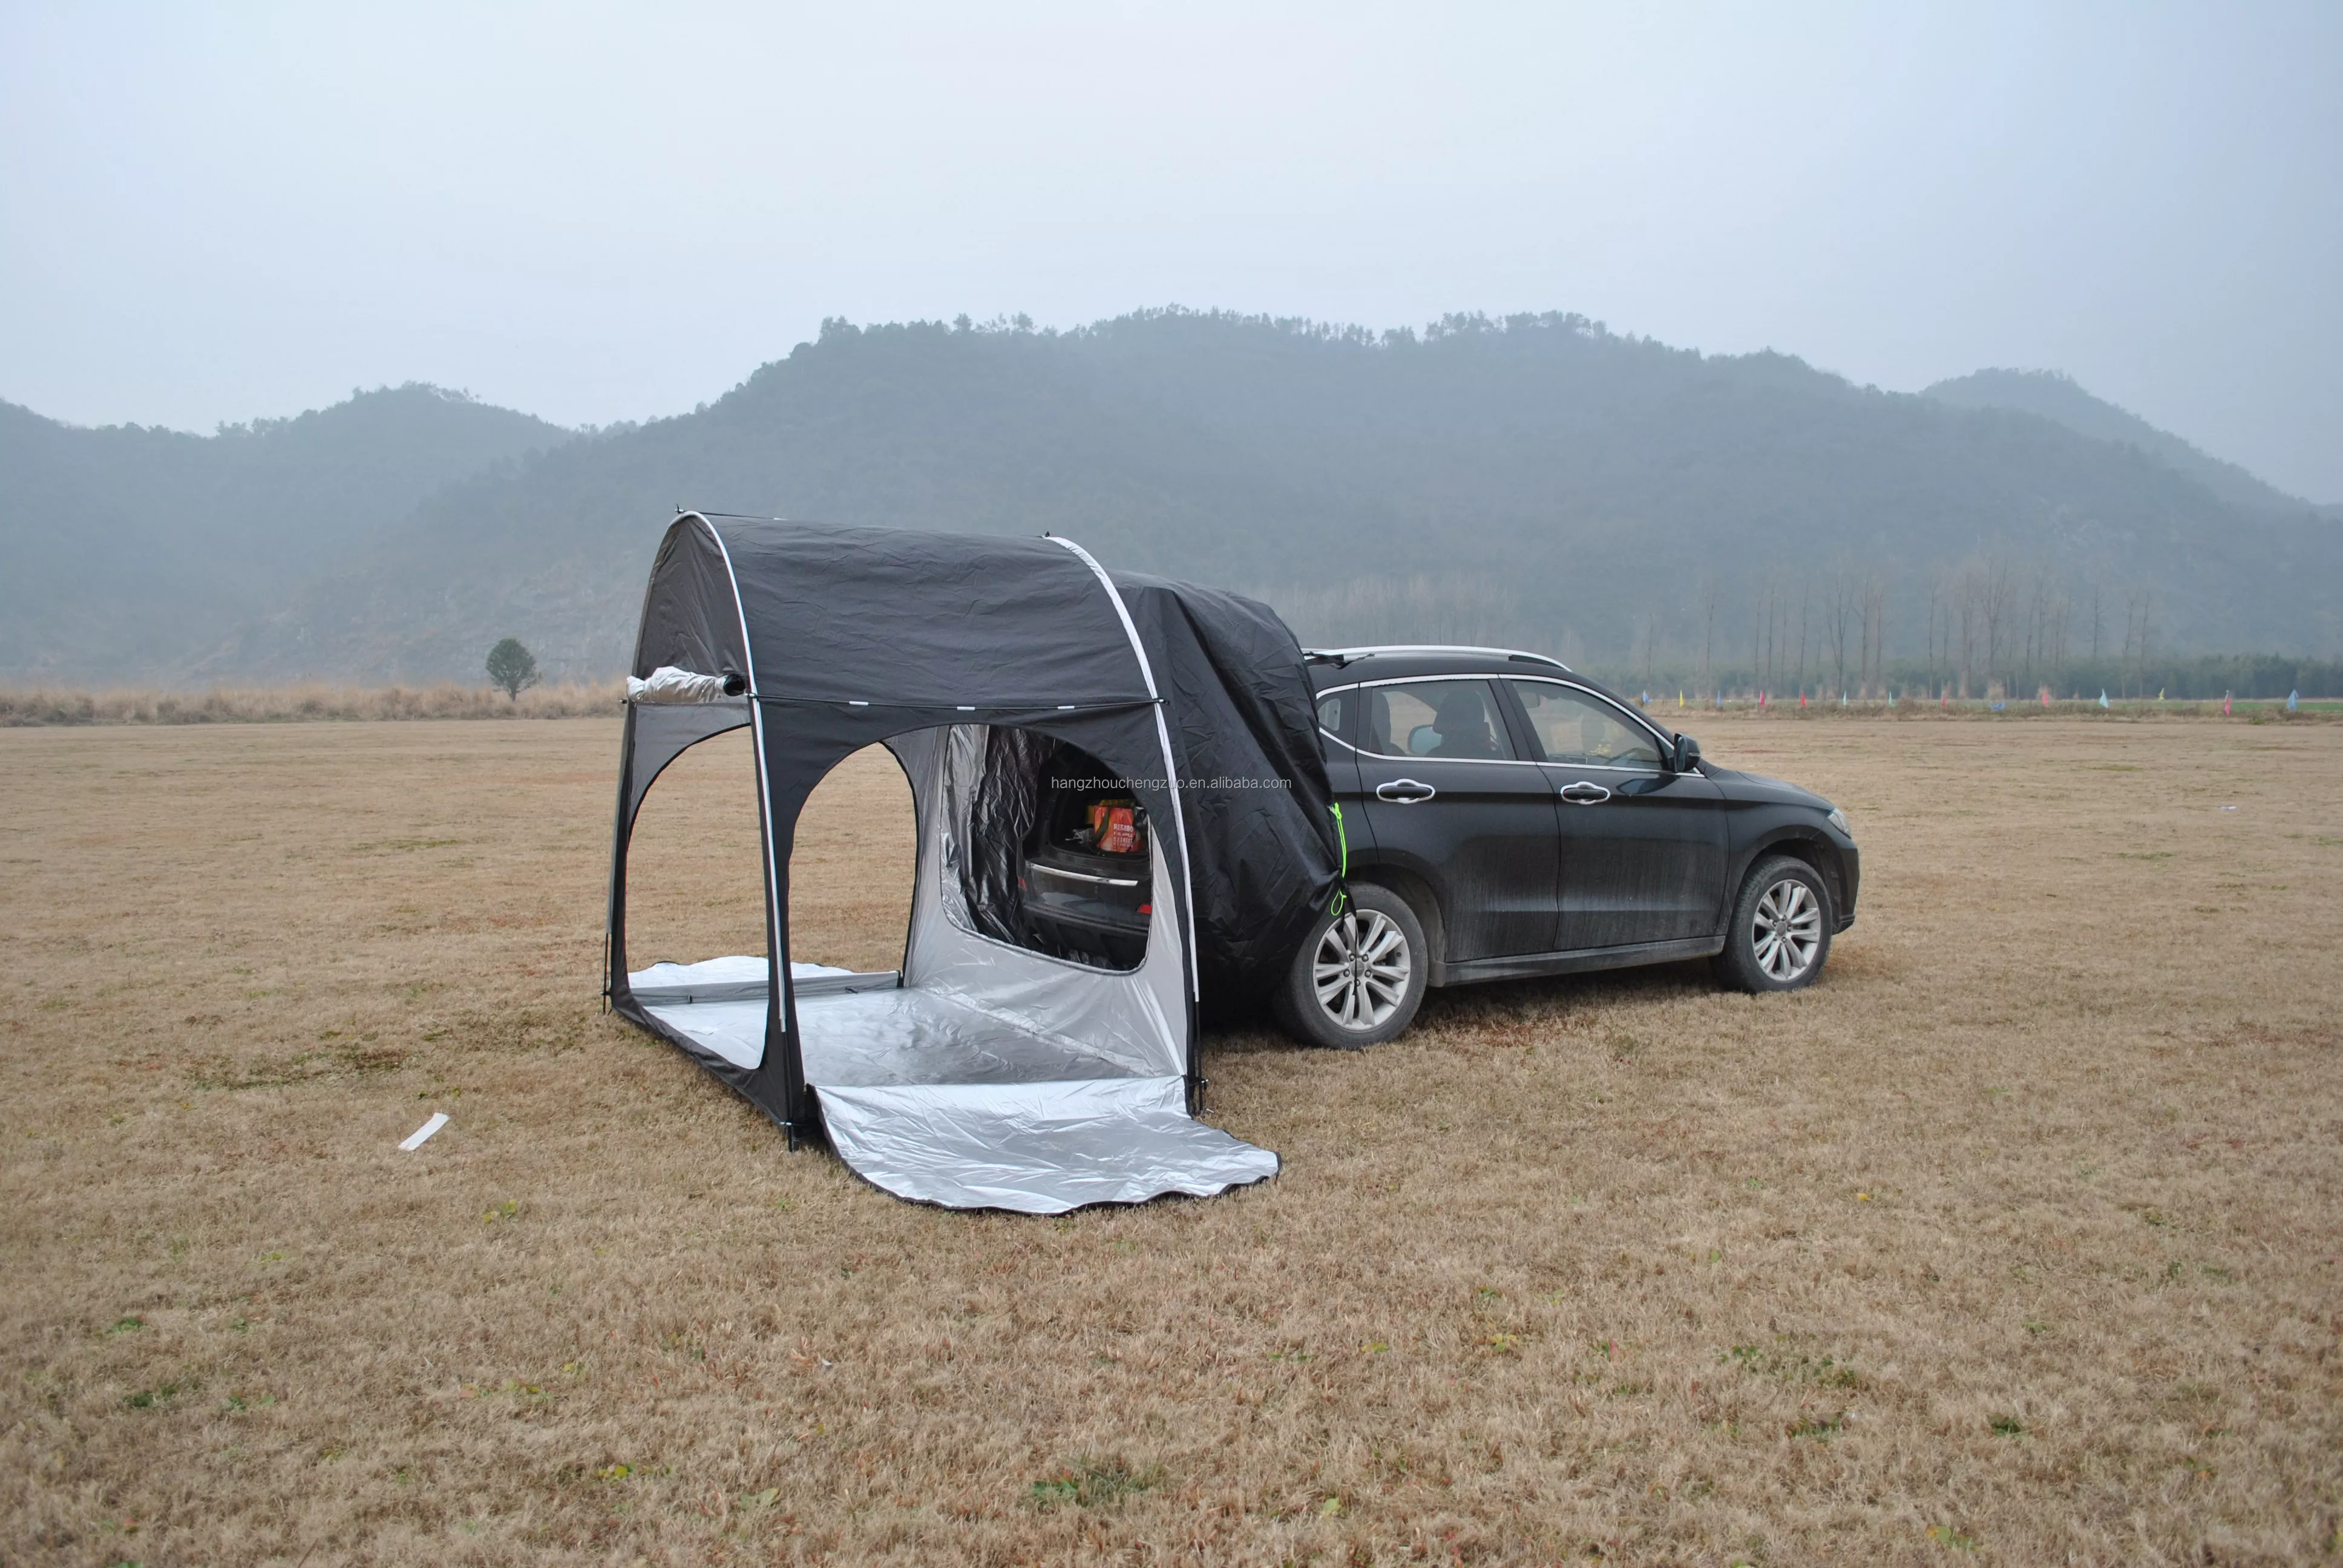 Cheap Goat Tents CZX 557 Car Awning Sun Shelter tent,SUV Rear Tent,Portable Waterproof car rear tent can be used as bike tent or storage tent   